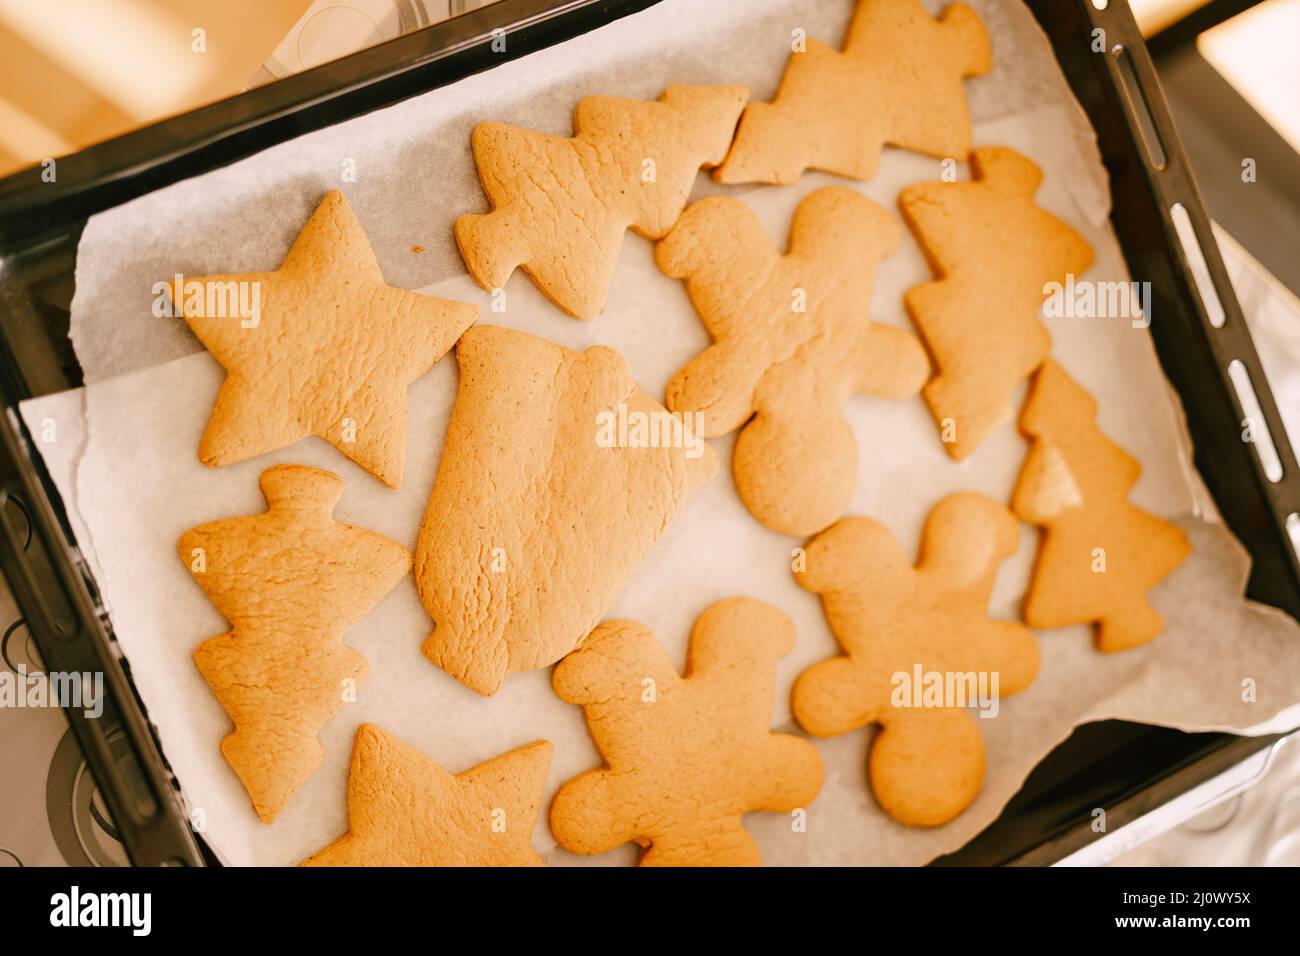 Freshly cooked gingerbread on a baking sheet from the oven, close-up of various shapes of cookies. Stock Photo